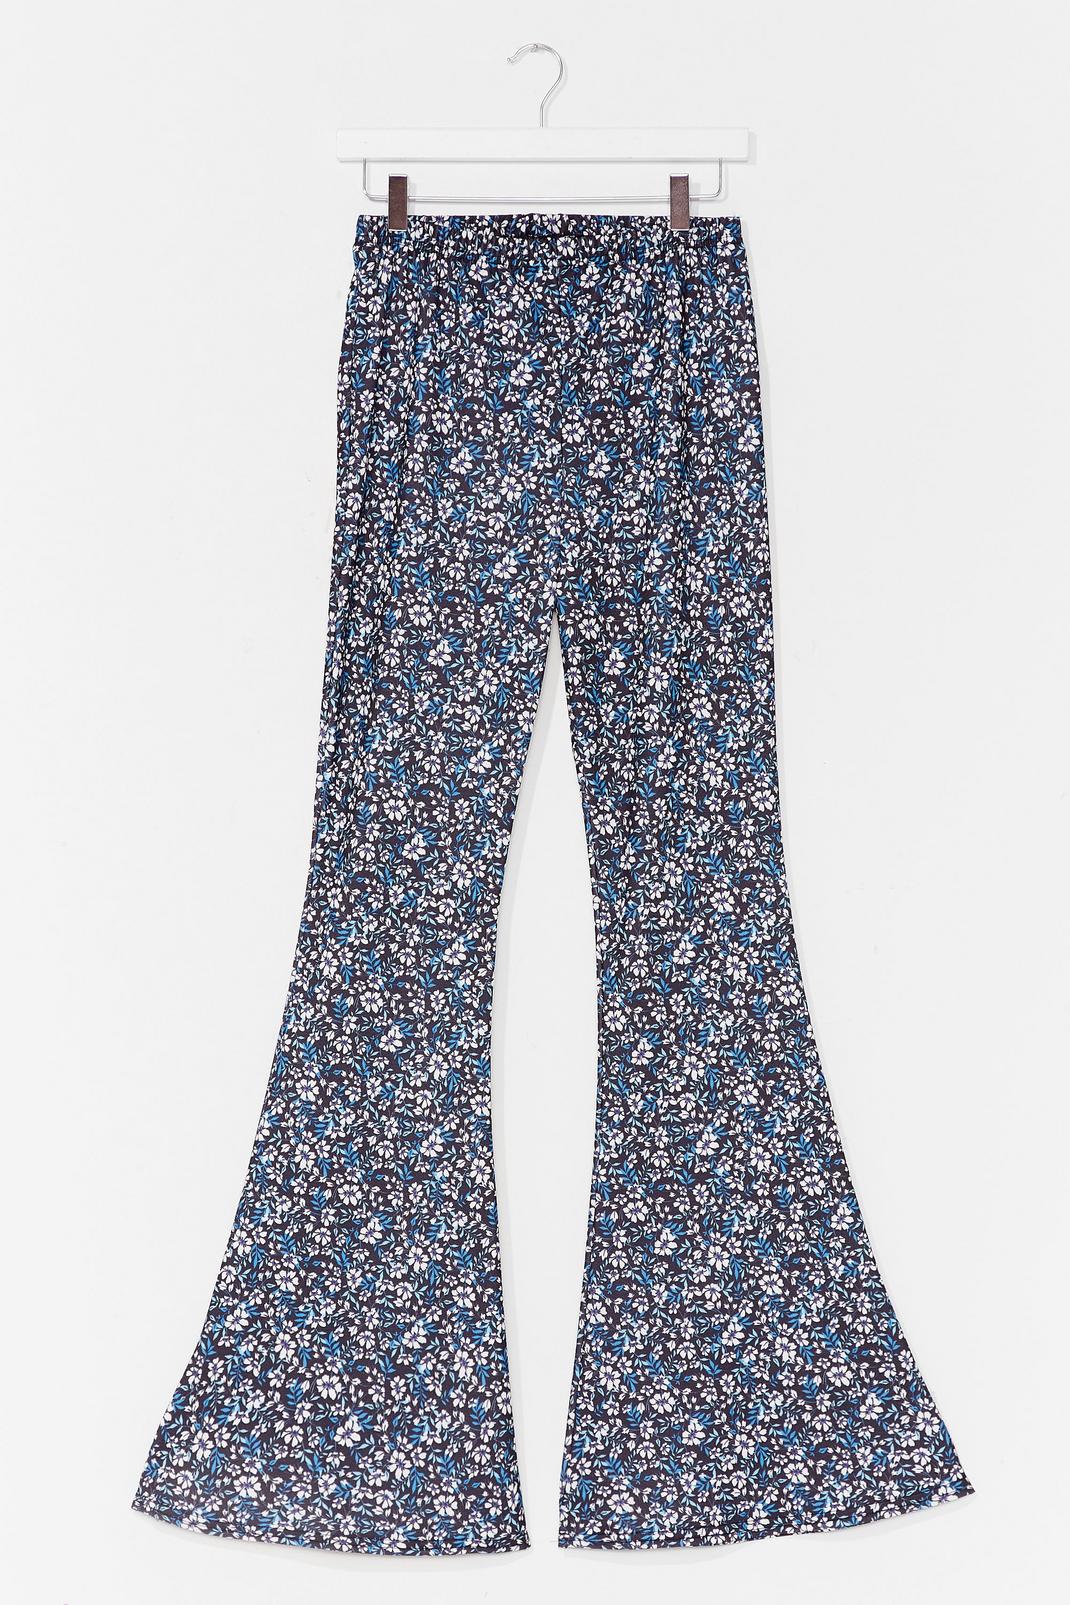 Flare to Be Different Floral High-Waisted Trousers image number 1